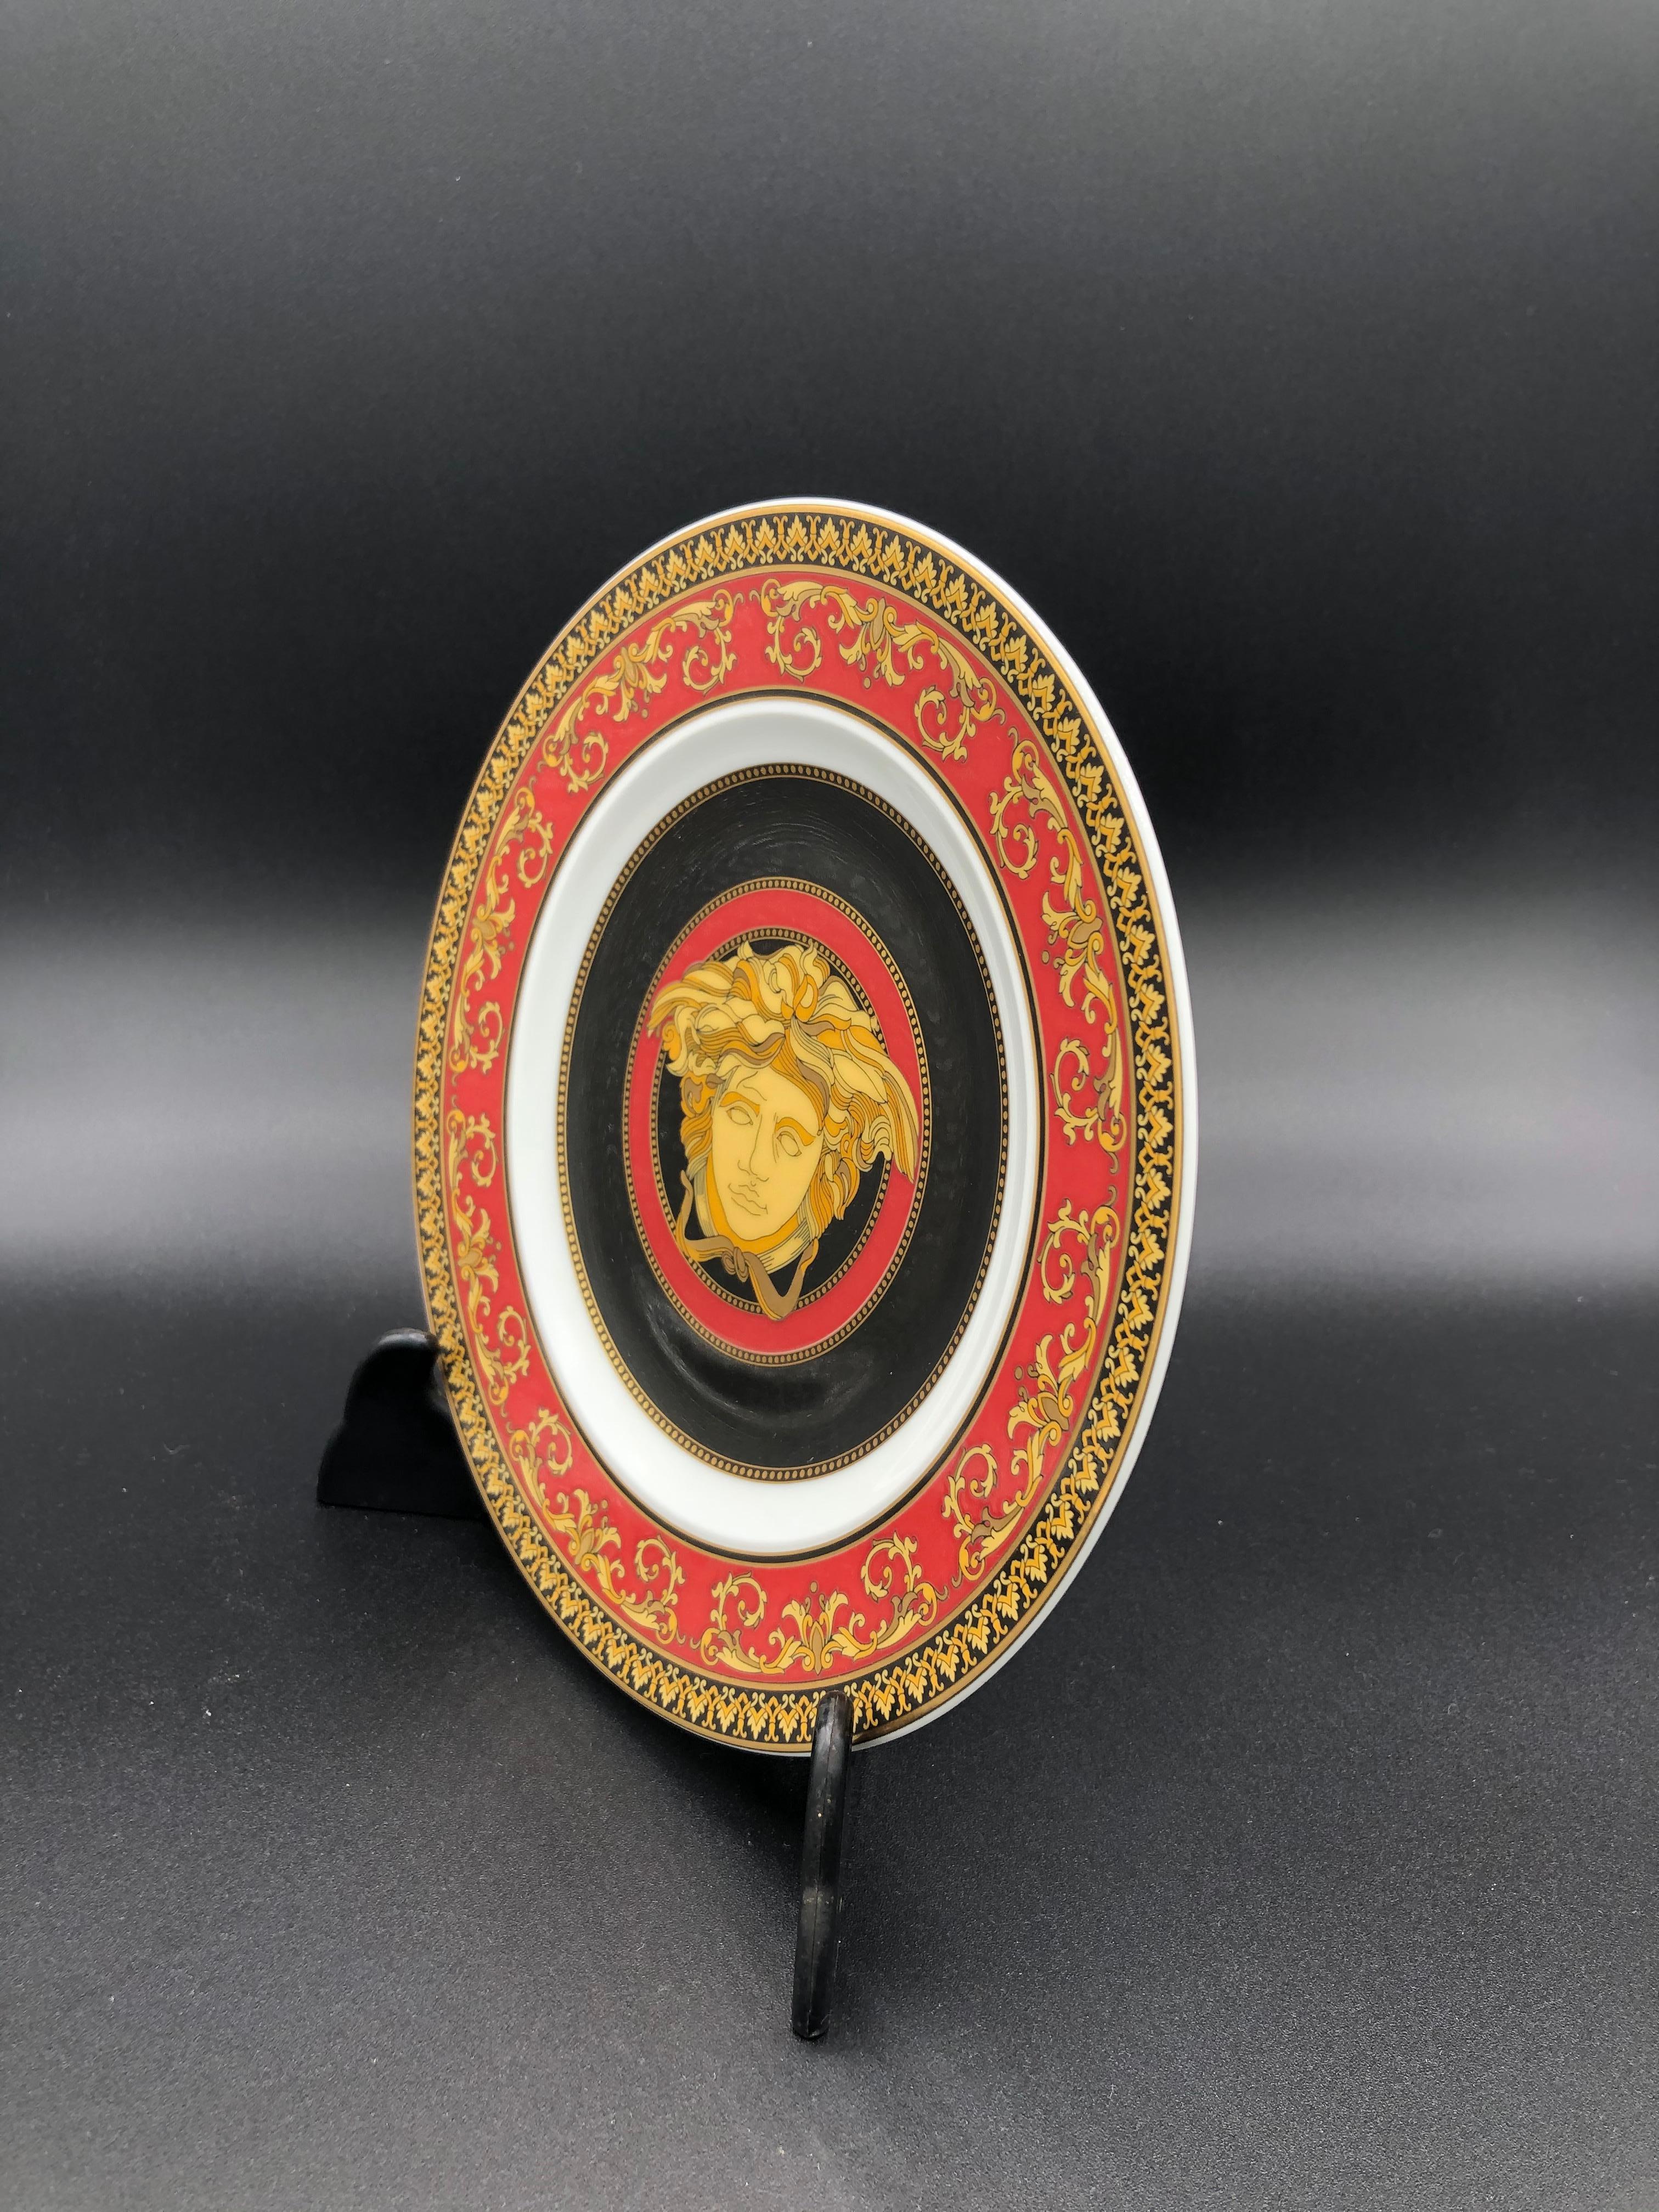 Rosenthal Versace Medusa Plate Boxed. This stunning Versace dinnerware is called Medusa Red. It is produced using the finest porcelain creating a style that is best described as luxurious and glamorous. The bread & butter plate measures 7 inch. The